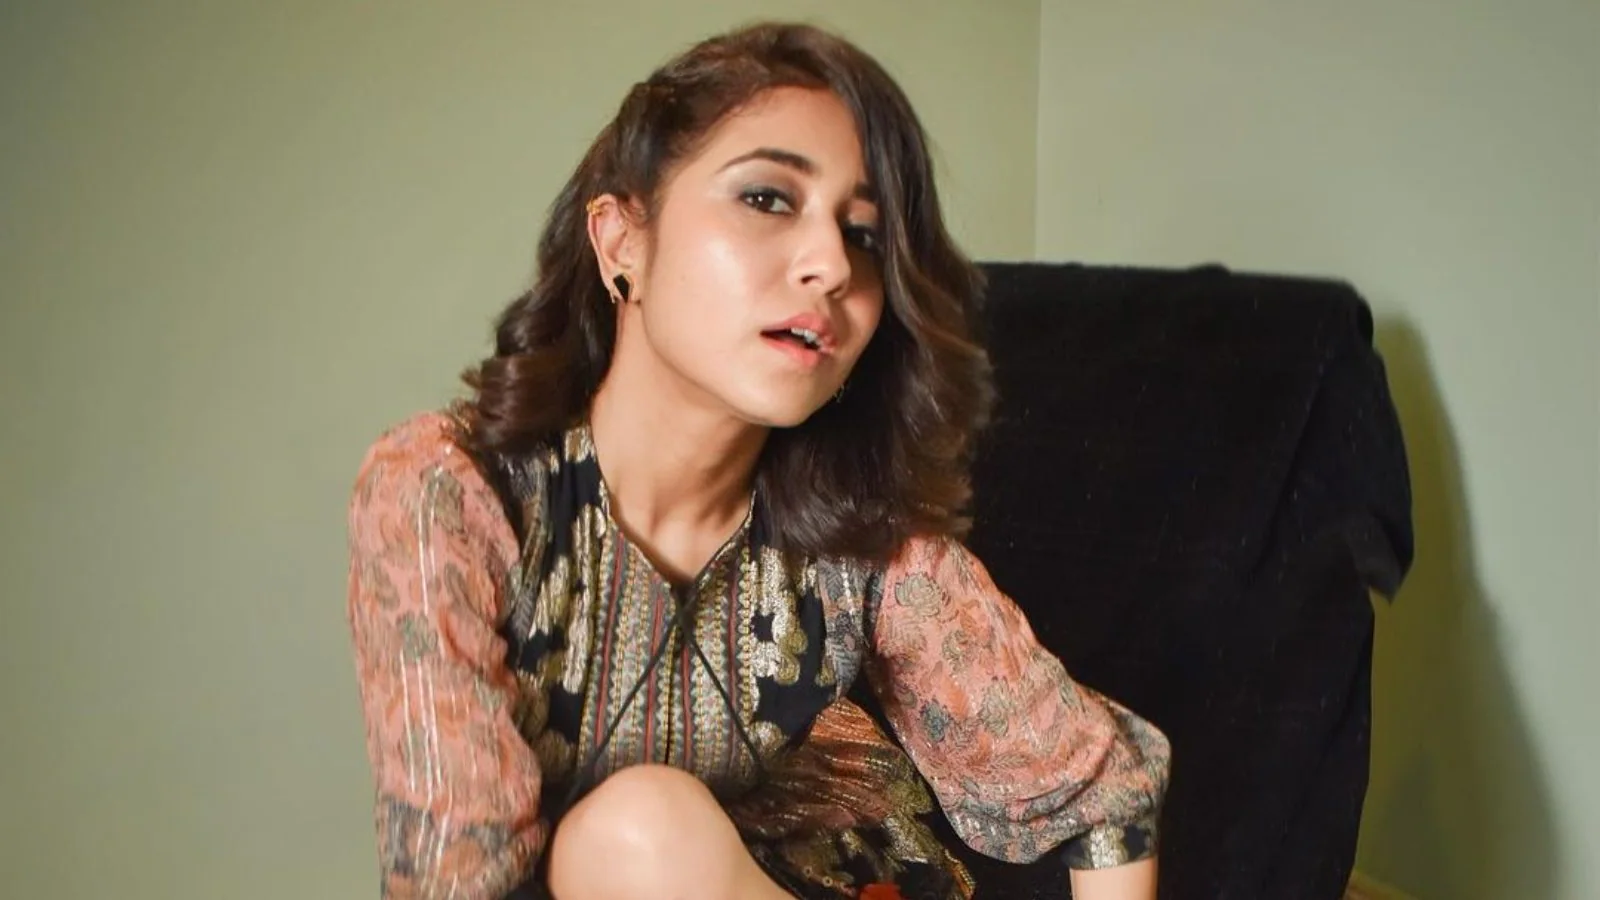 Shweta Tripathi: Don’t Want to Limit Myself, Want to Do International, Regional Projects As Well